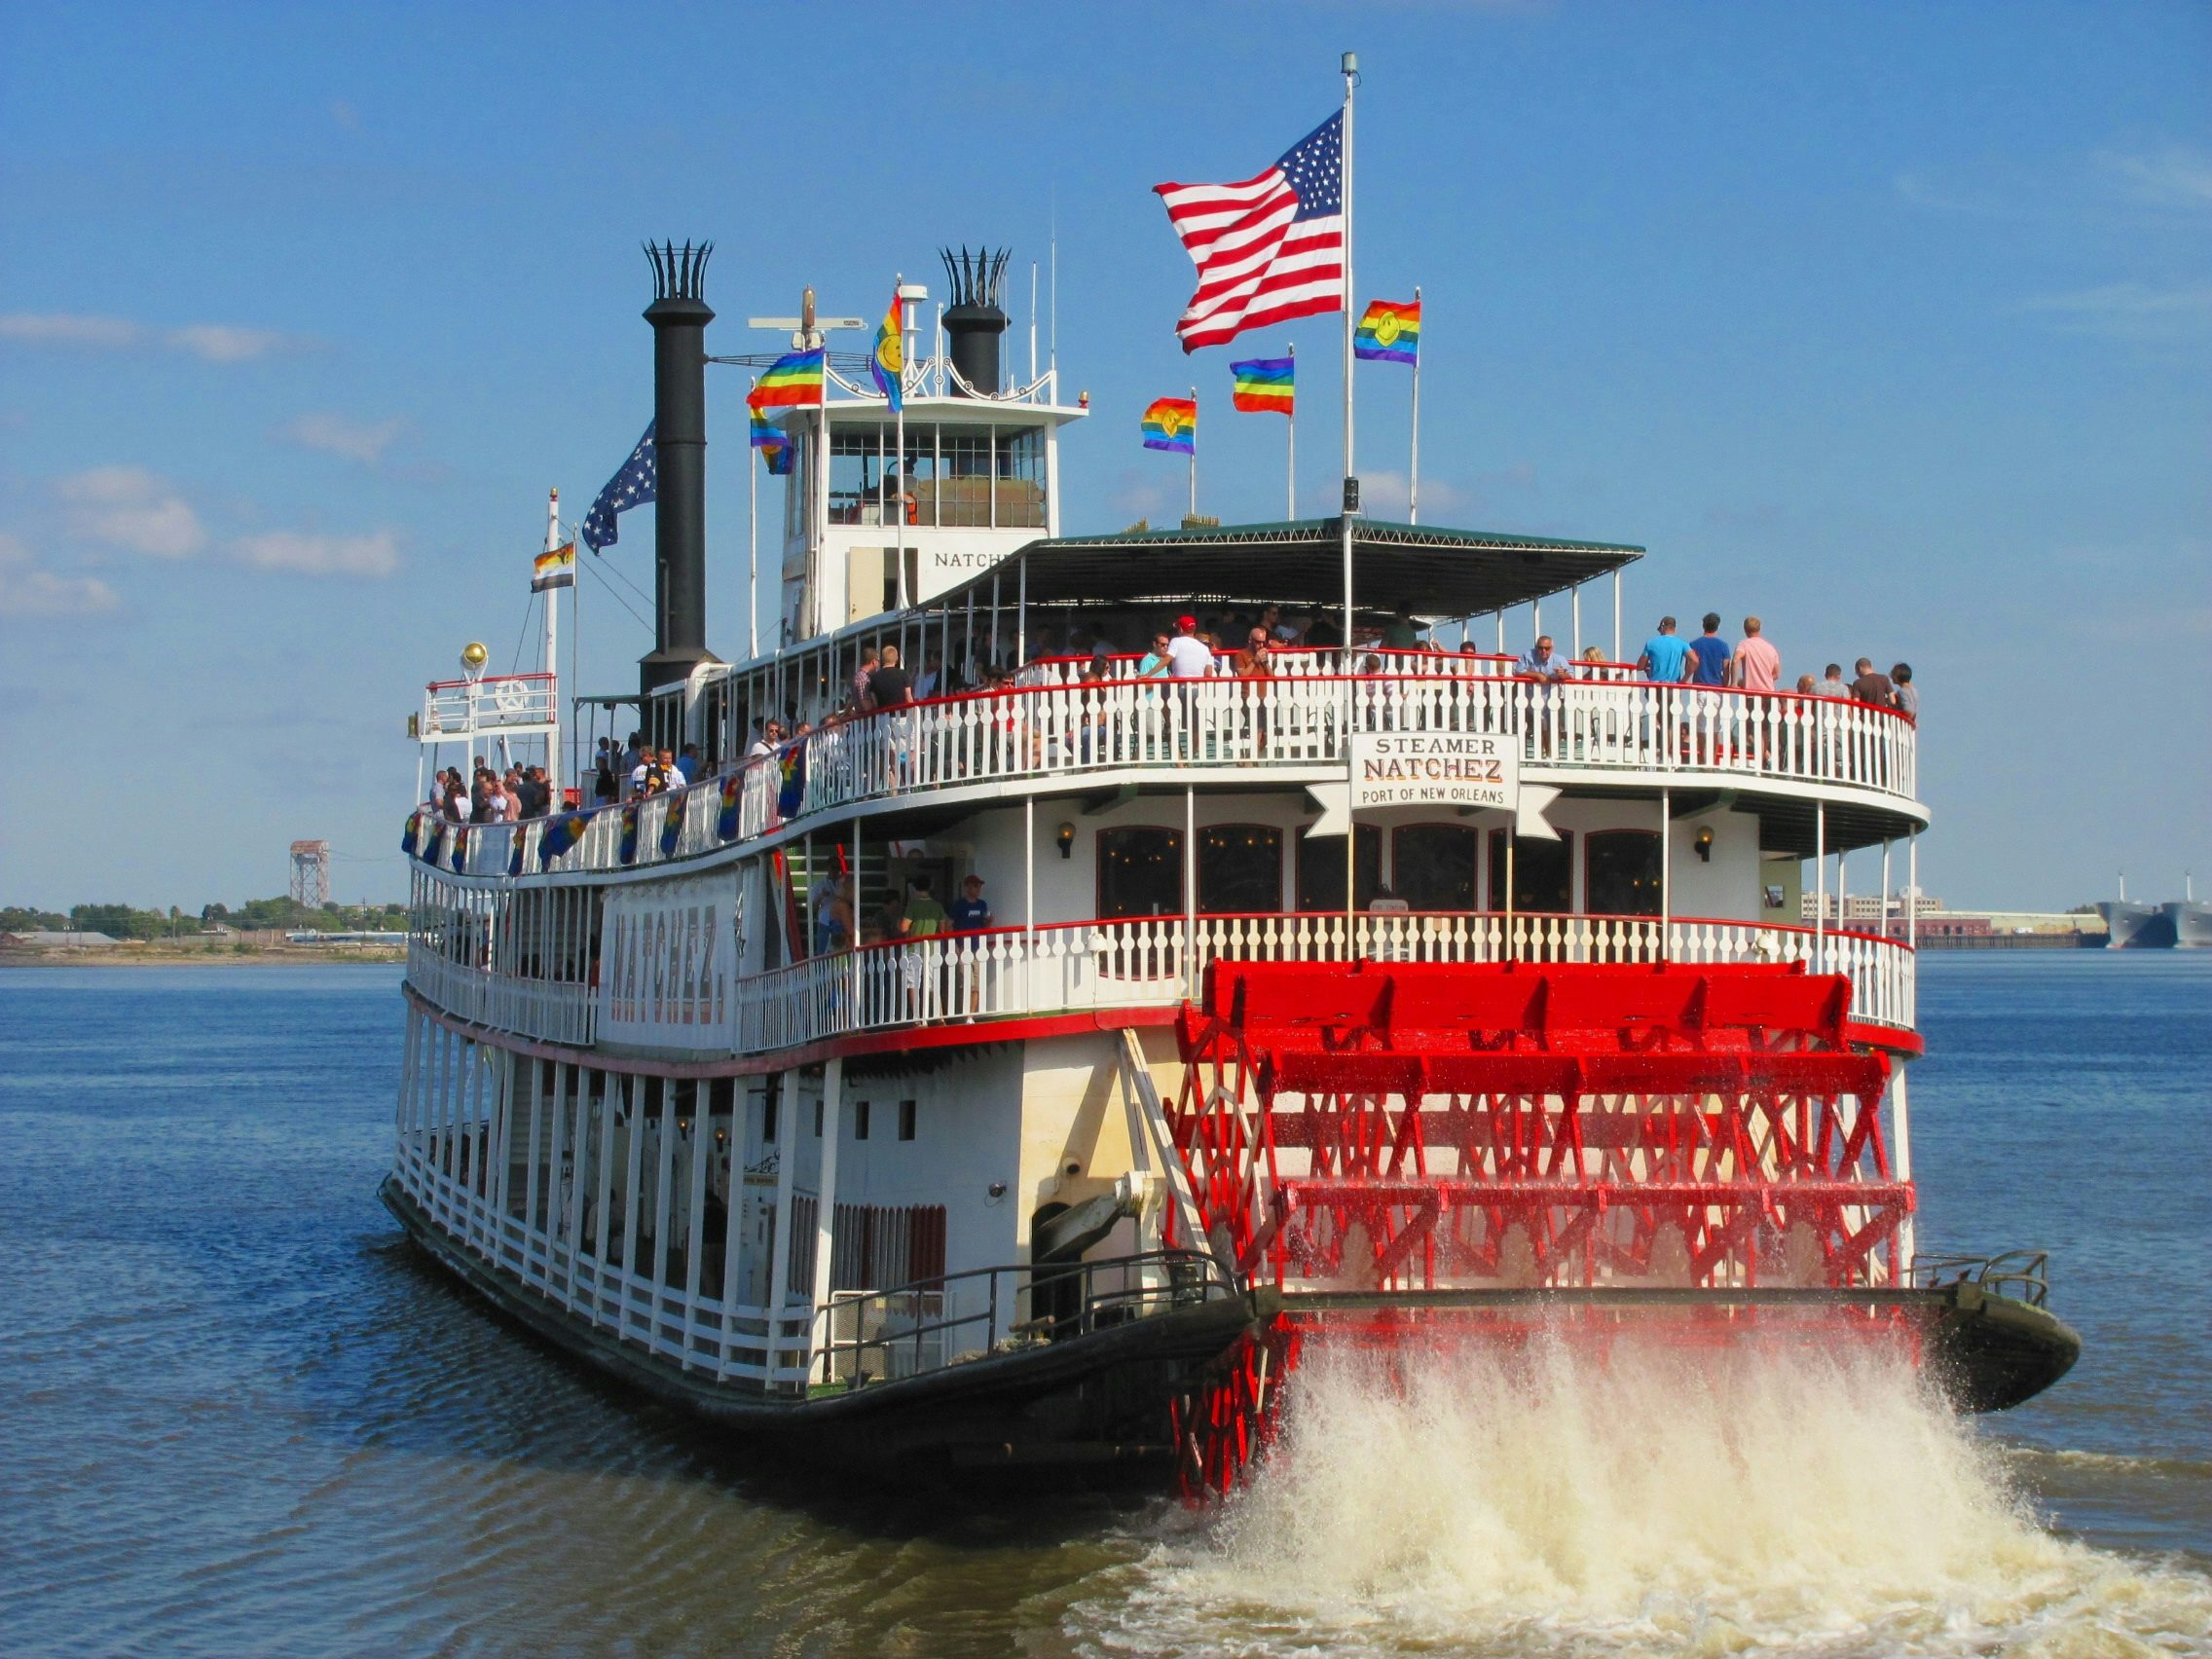 riverboat cruise on the mississippi river